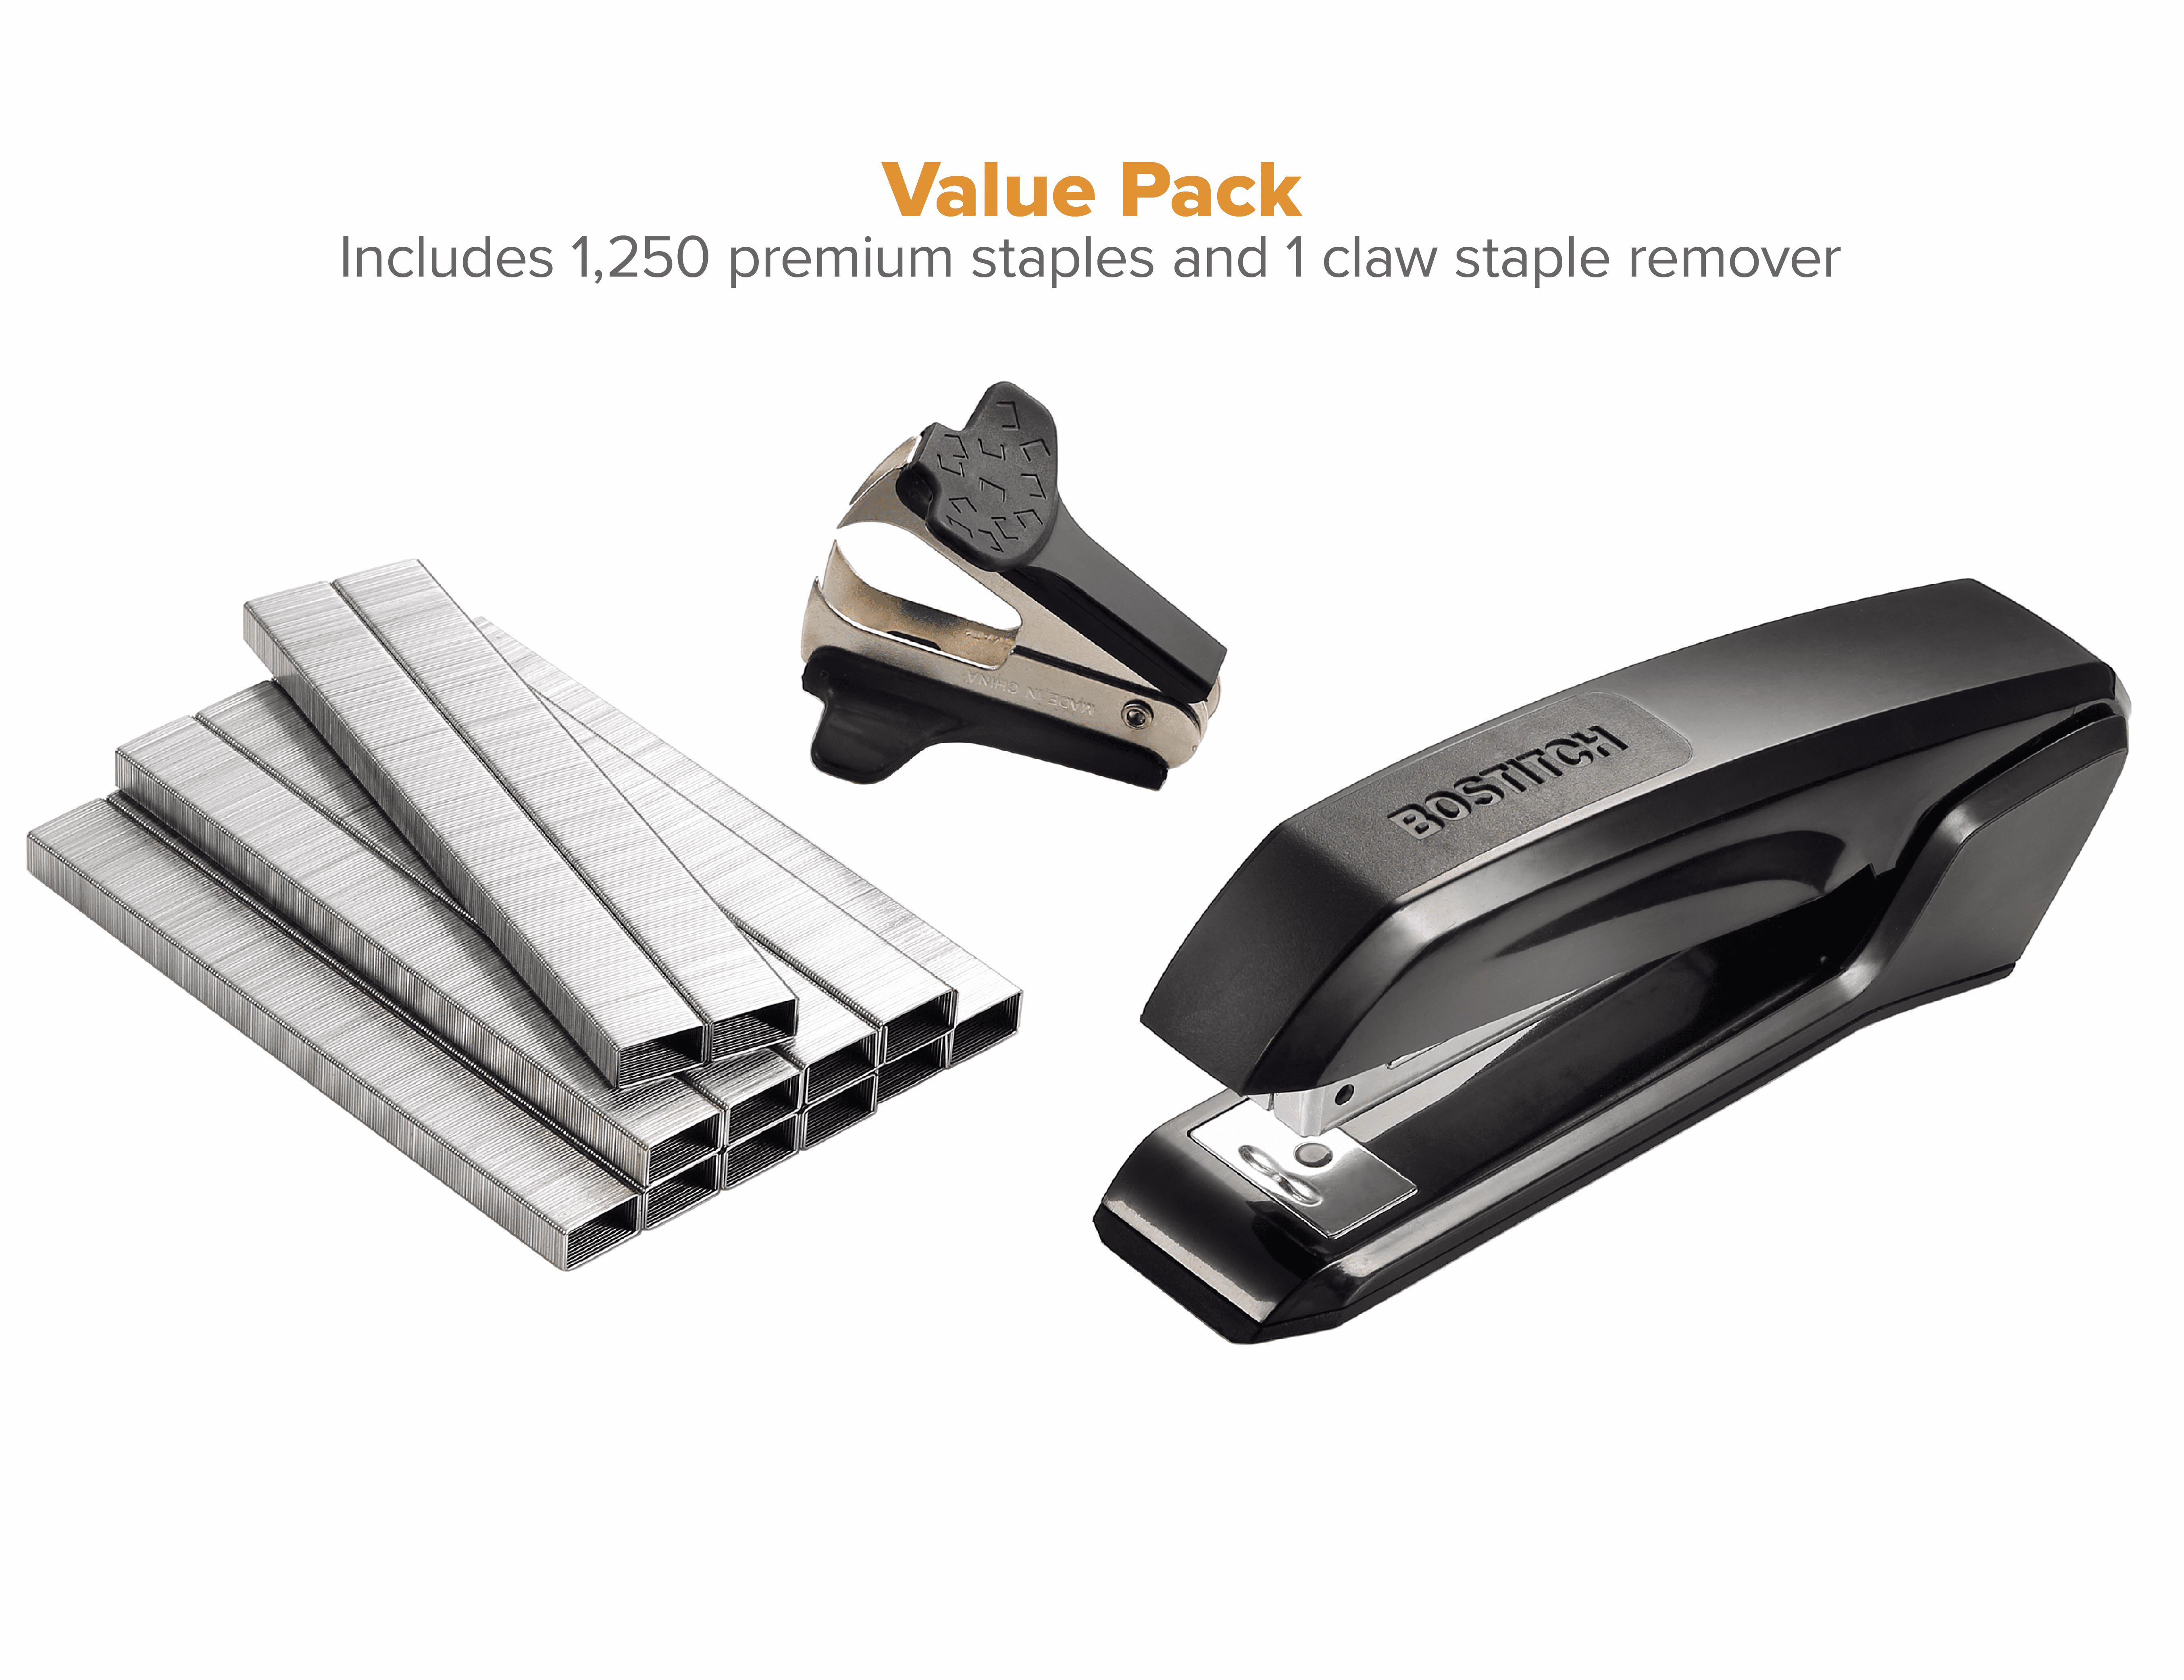 Bostitch Office Heavy Duty 40 Sheet Stapler with 1250 Staples & Claw Remover, Small Stapler size, Fits Into The Palm of Your Hand, Value Pack, Red (